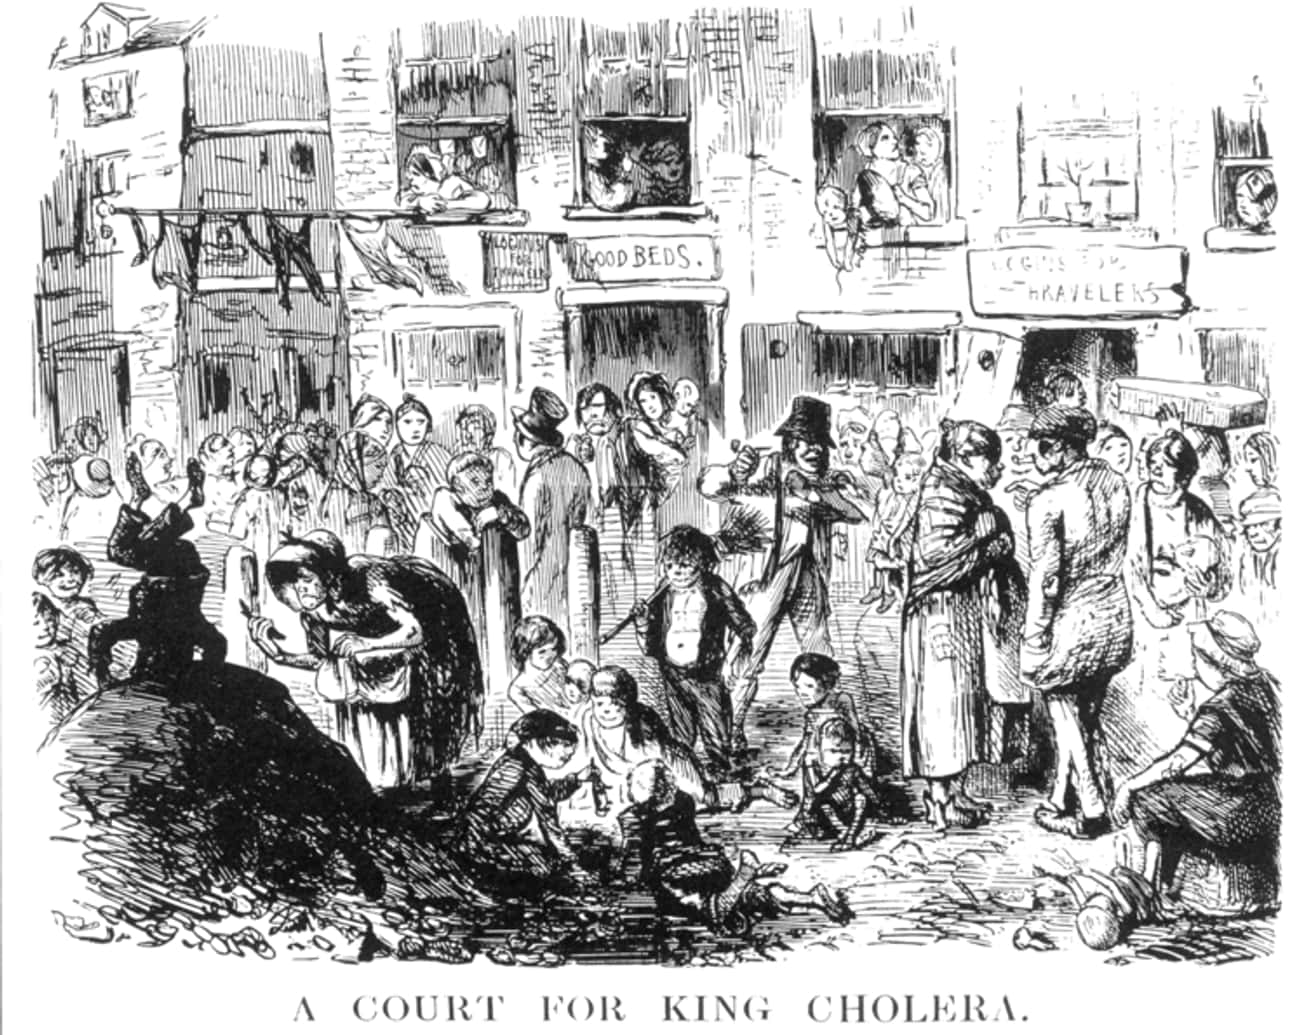 The Working Theory At The Time, The &#34;Miasma Theory,&#34; Blamed Cholera On London’s Slums